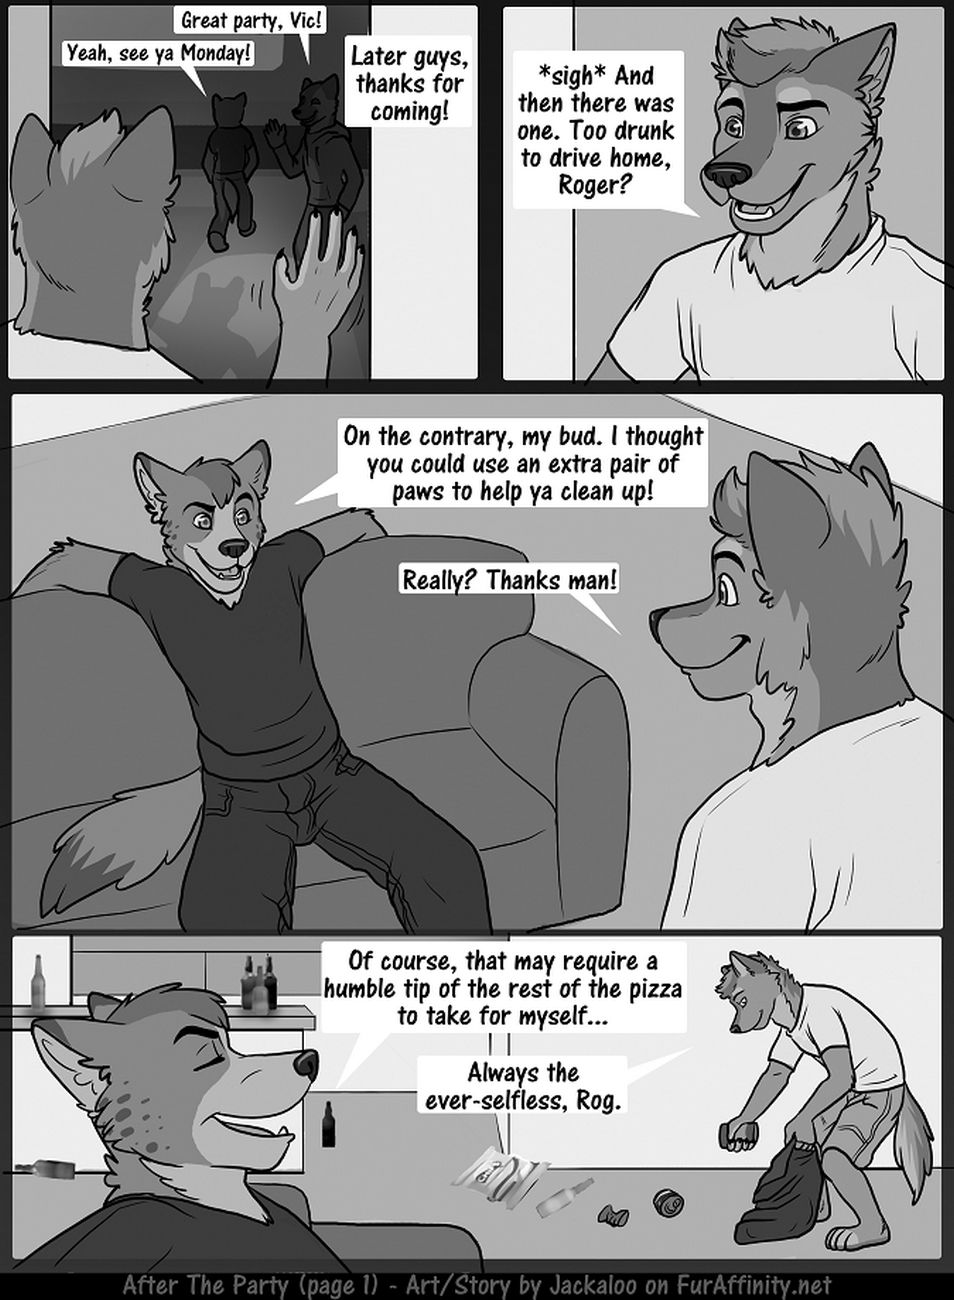 After The Party page 2